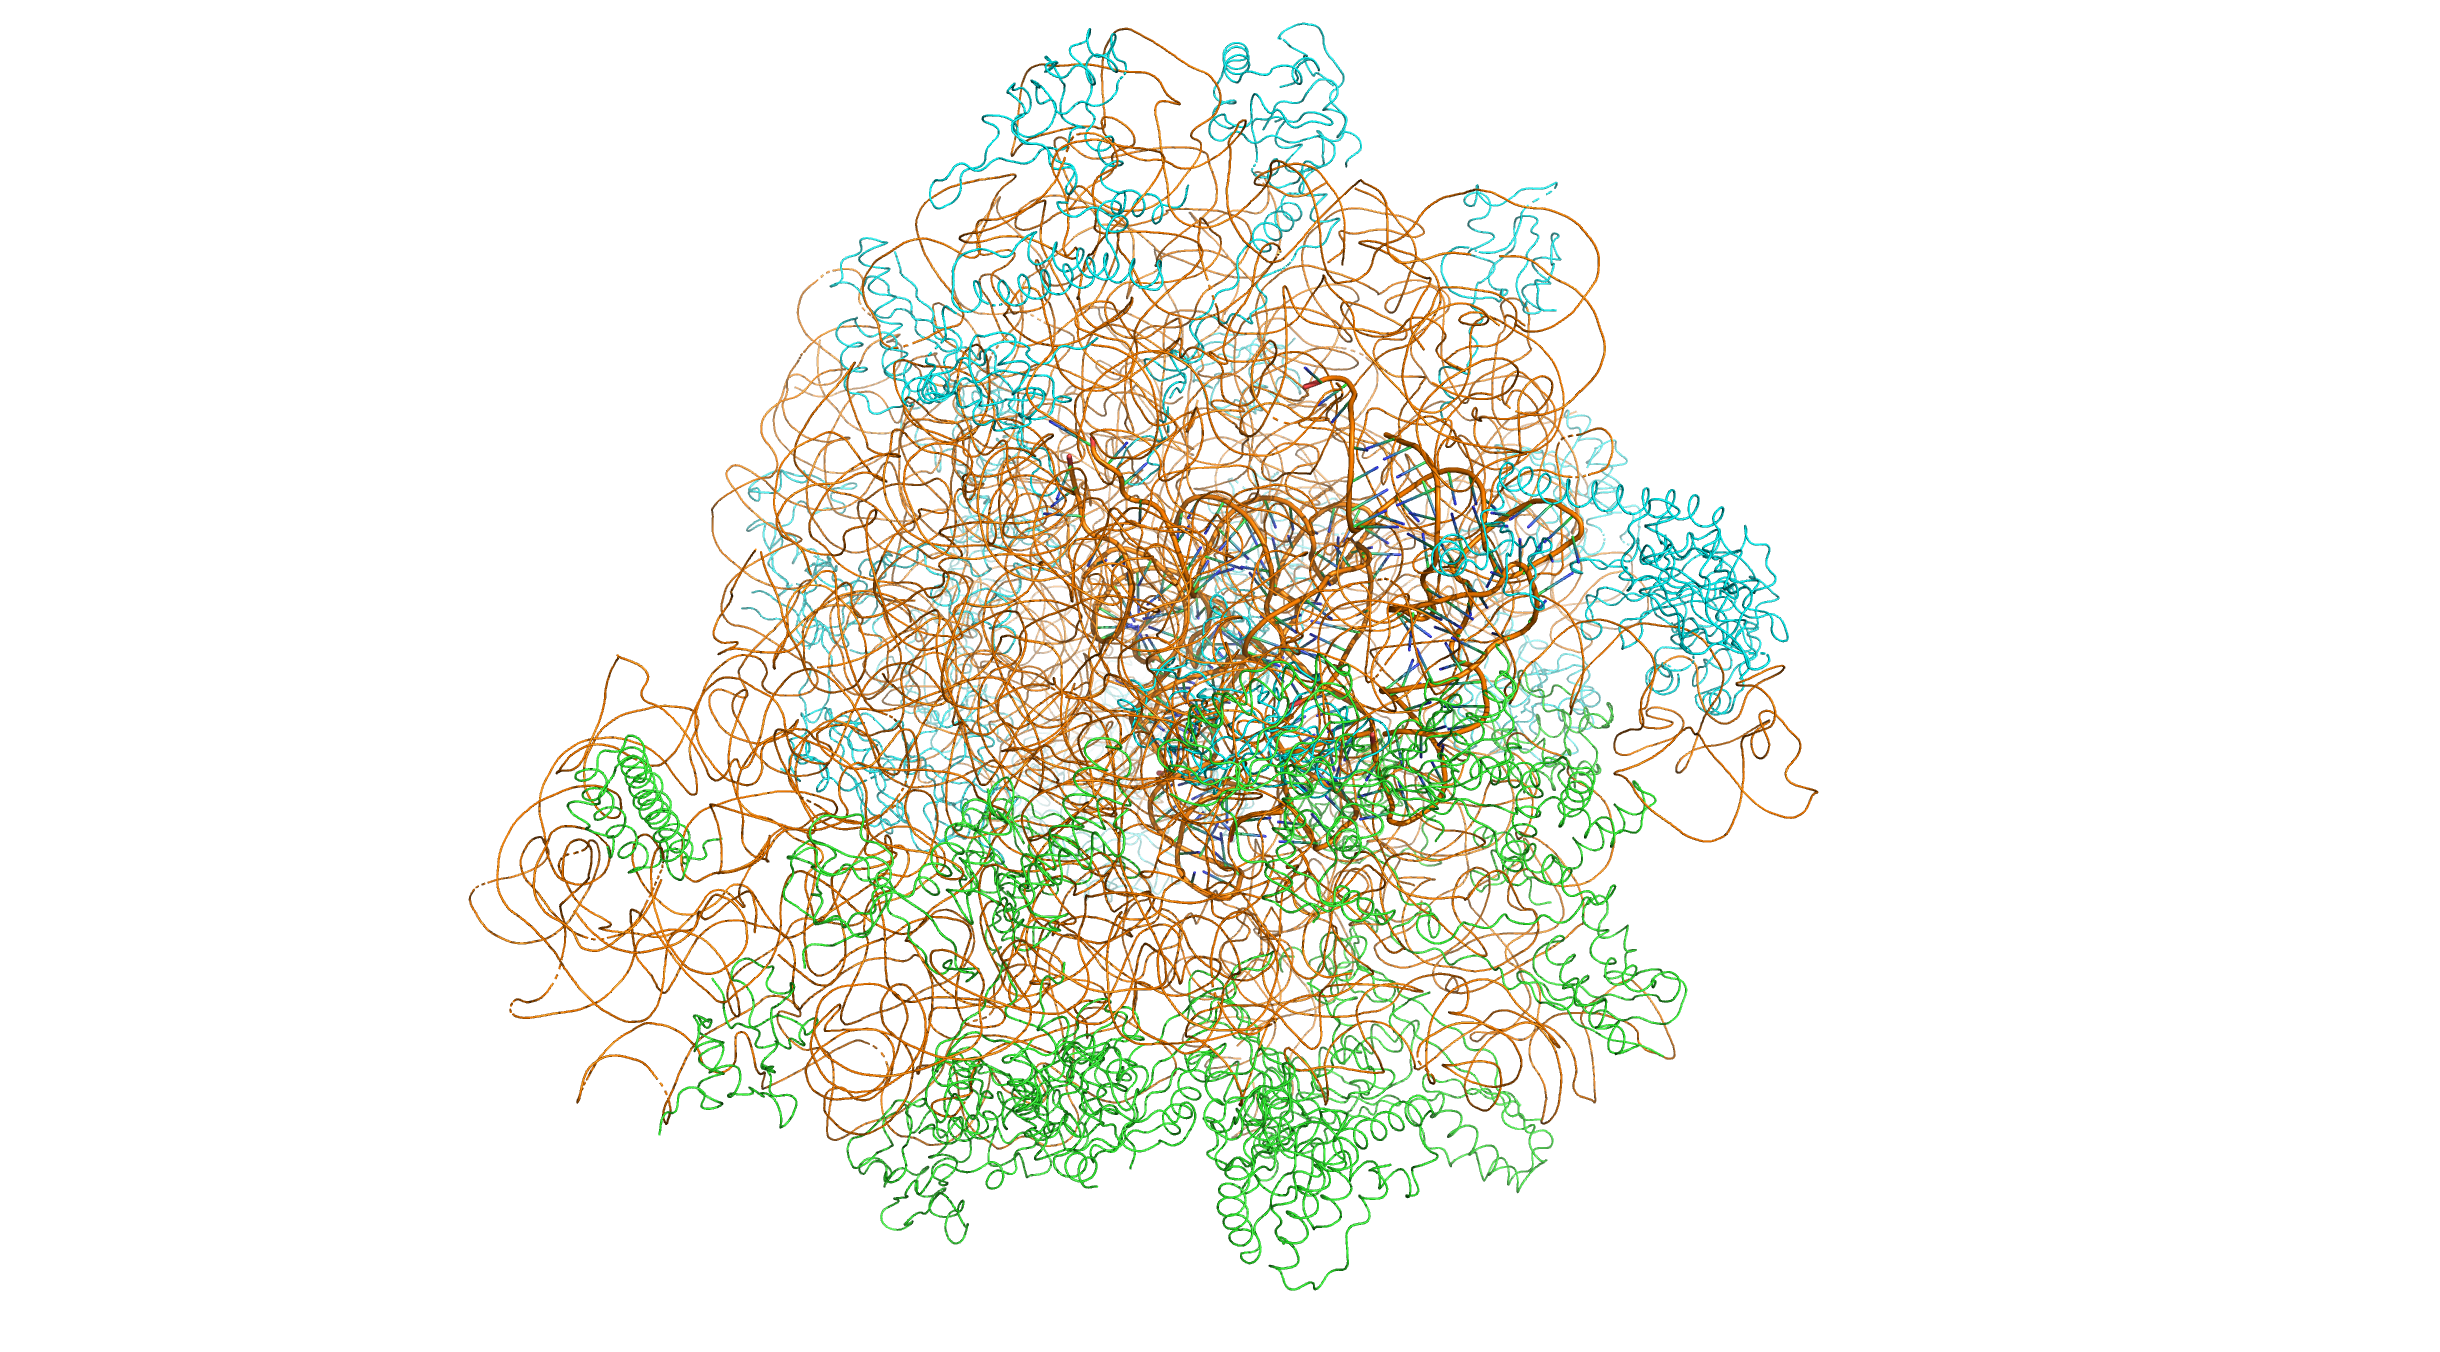 Crystal structure of the bacterial 70S ribosome of the bacterium Thermus thermophilus. The 30S (small) ribosomal subunit proteins are colored in green, the 50S (large) subunit proteins are colored in blue, the ribosomal RNA is colored orange. The 30S subunits contains 3 tRNA molecules (based on atomic coordinates of PDB 1JGQ and PDB 1GIY rendered with open source molecular visualization tool PyMol.)